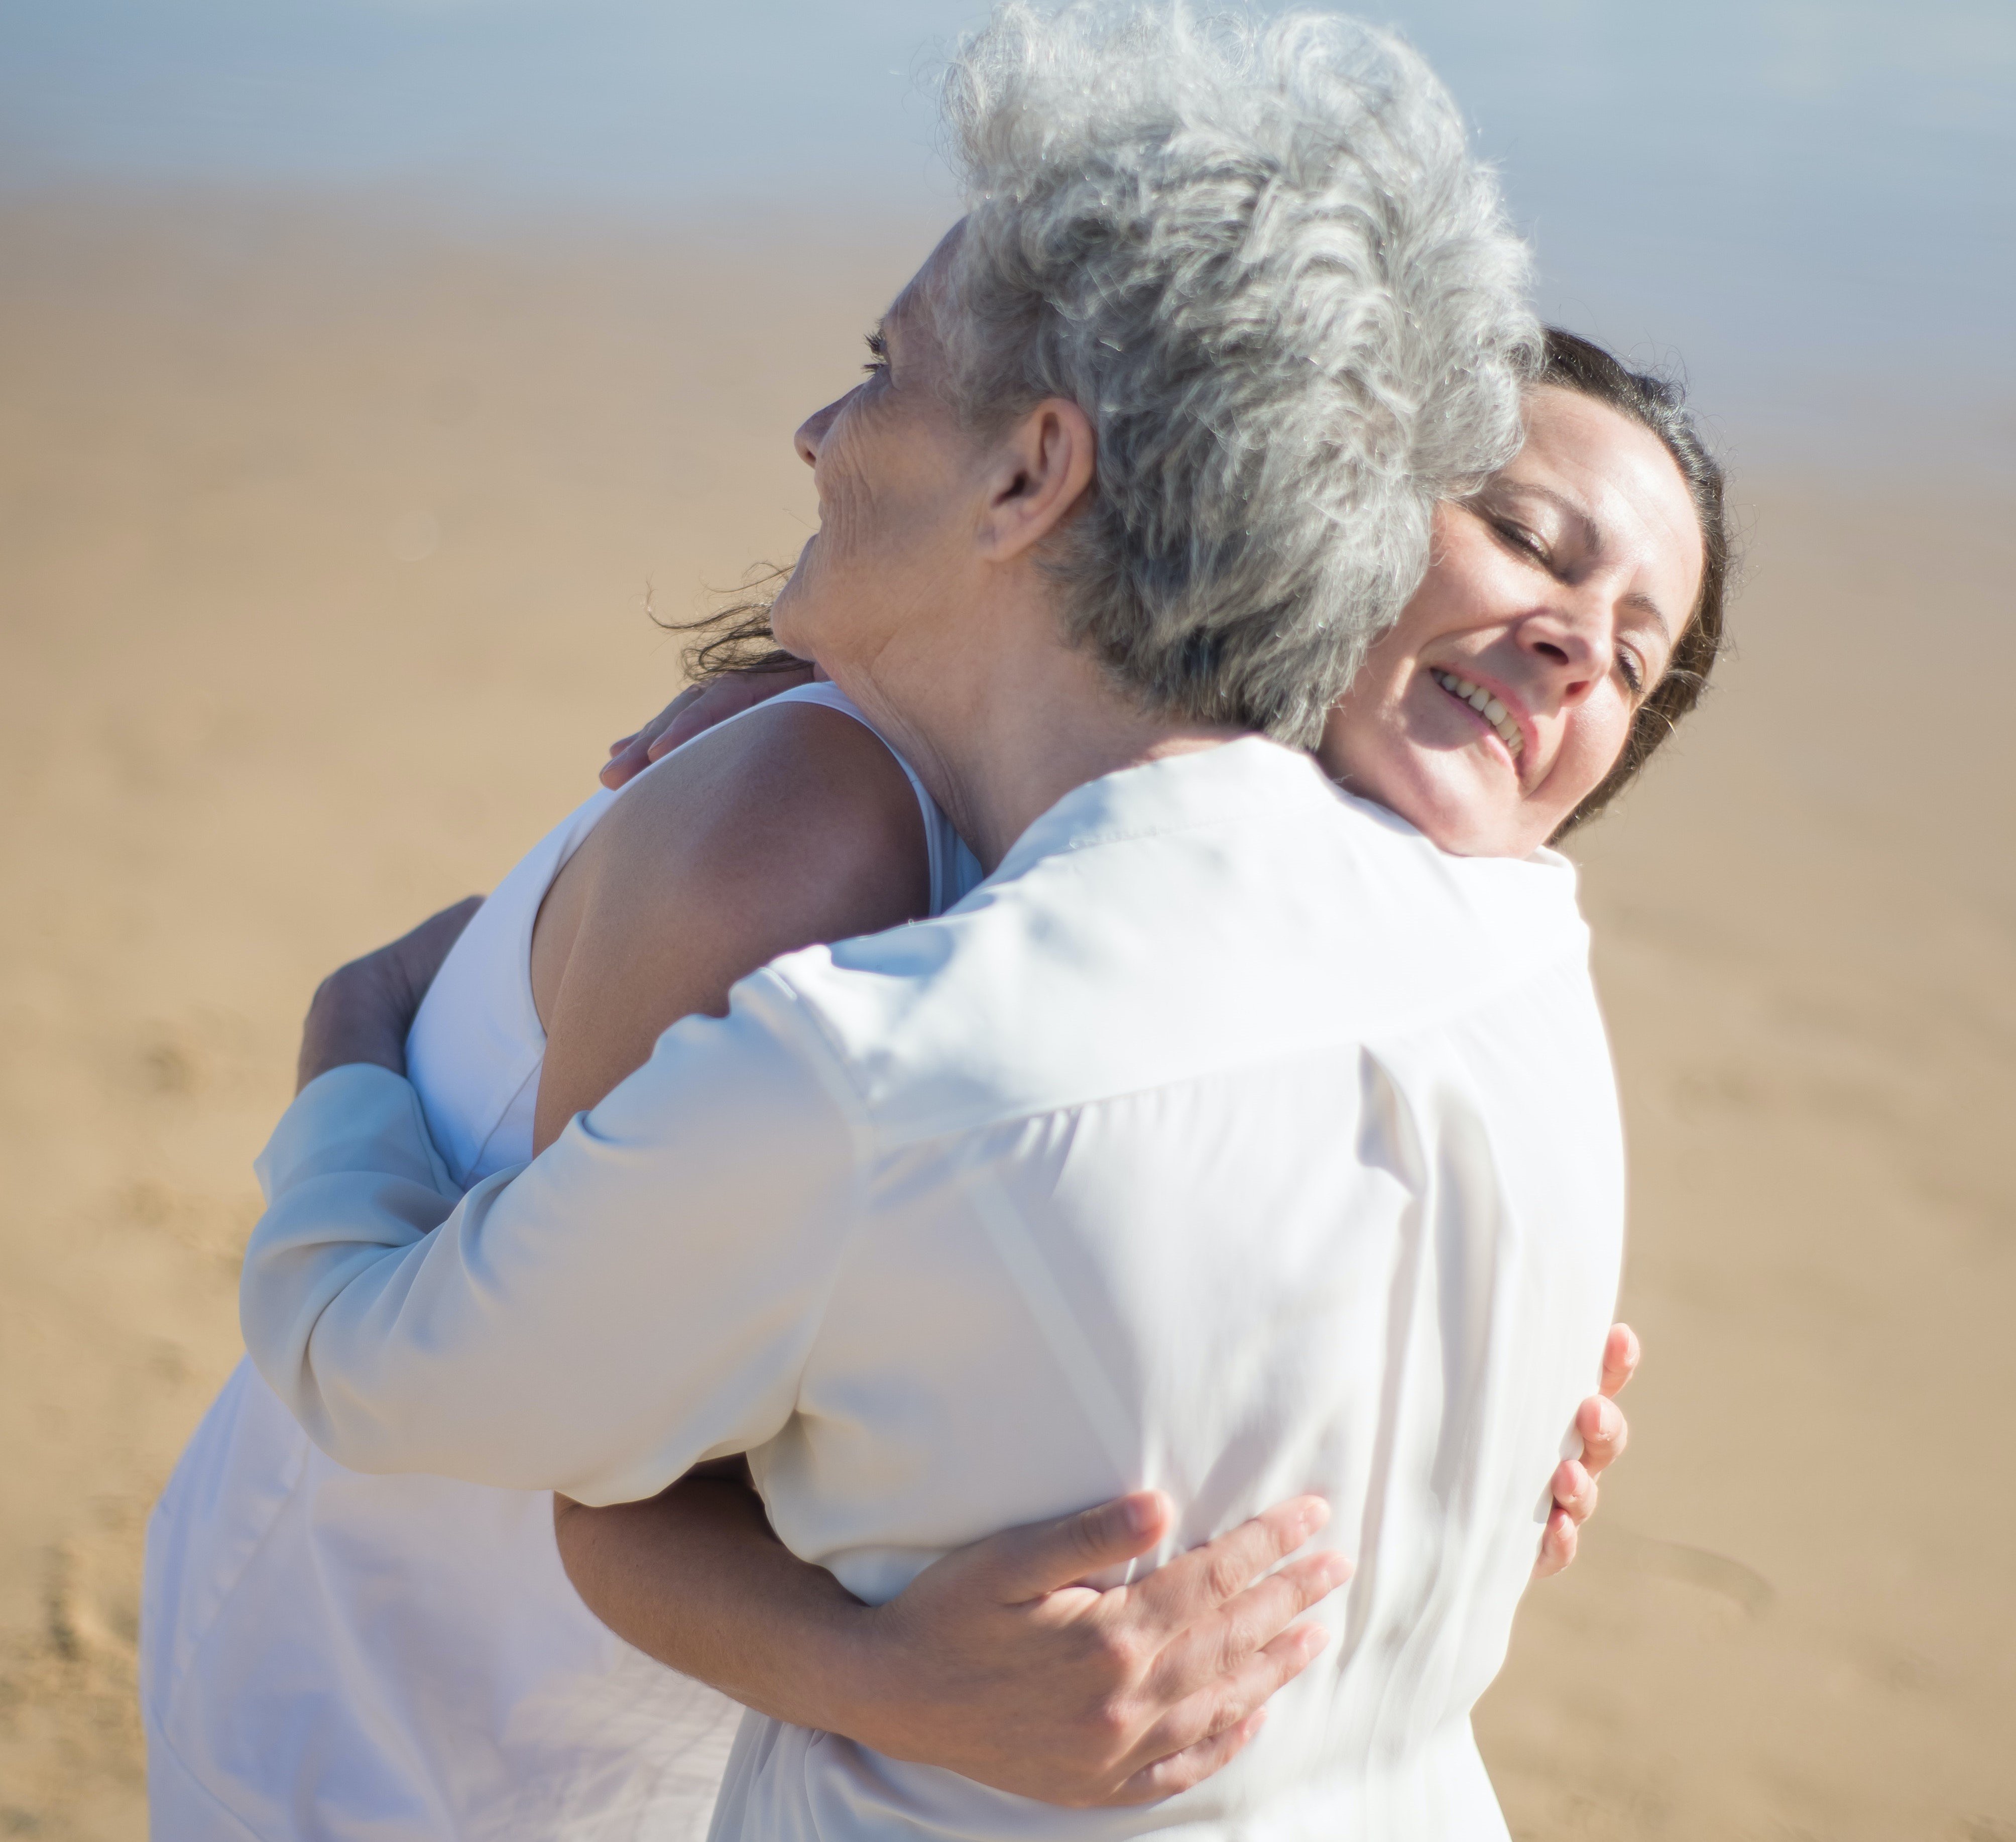 Linda & Janet harbored a friendship that lasted several years and counting! | Source: Pexels